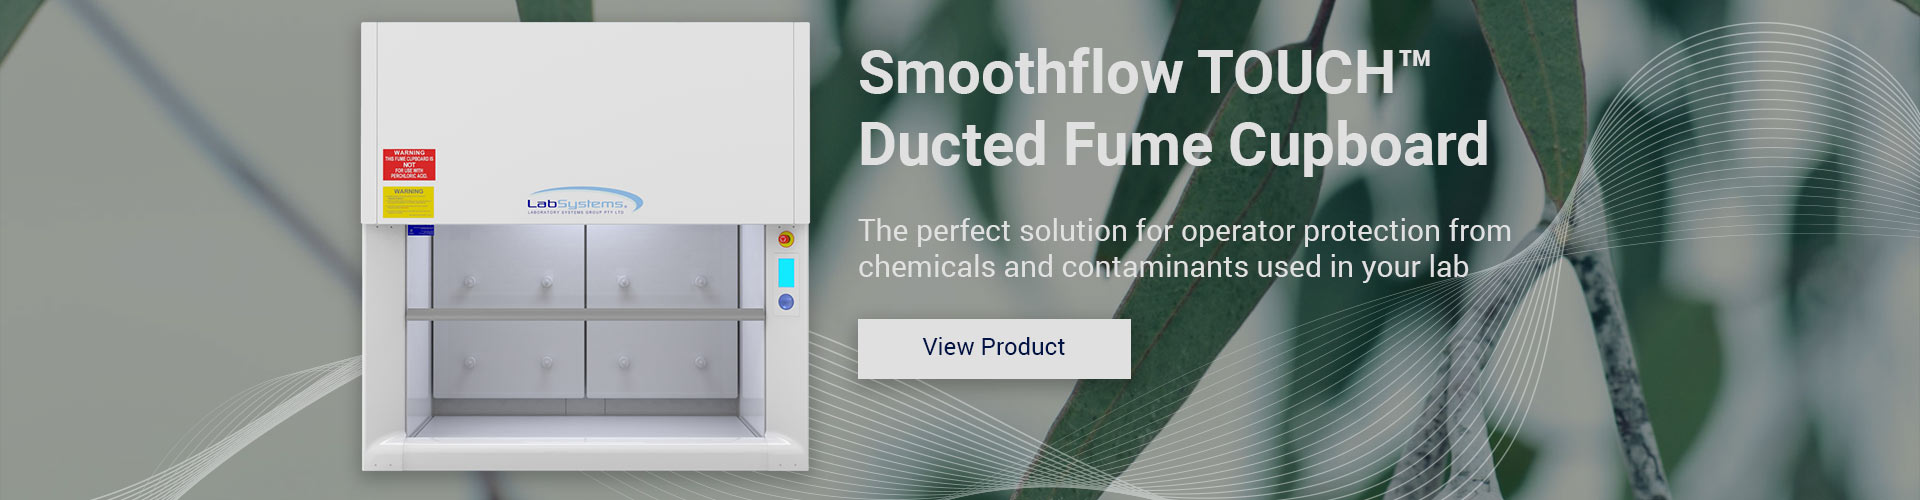 Learn about the Smoothflow Touch ducted fume cabinet